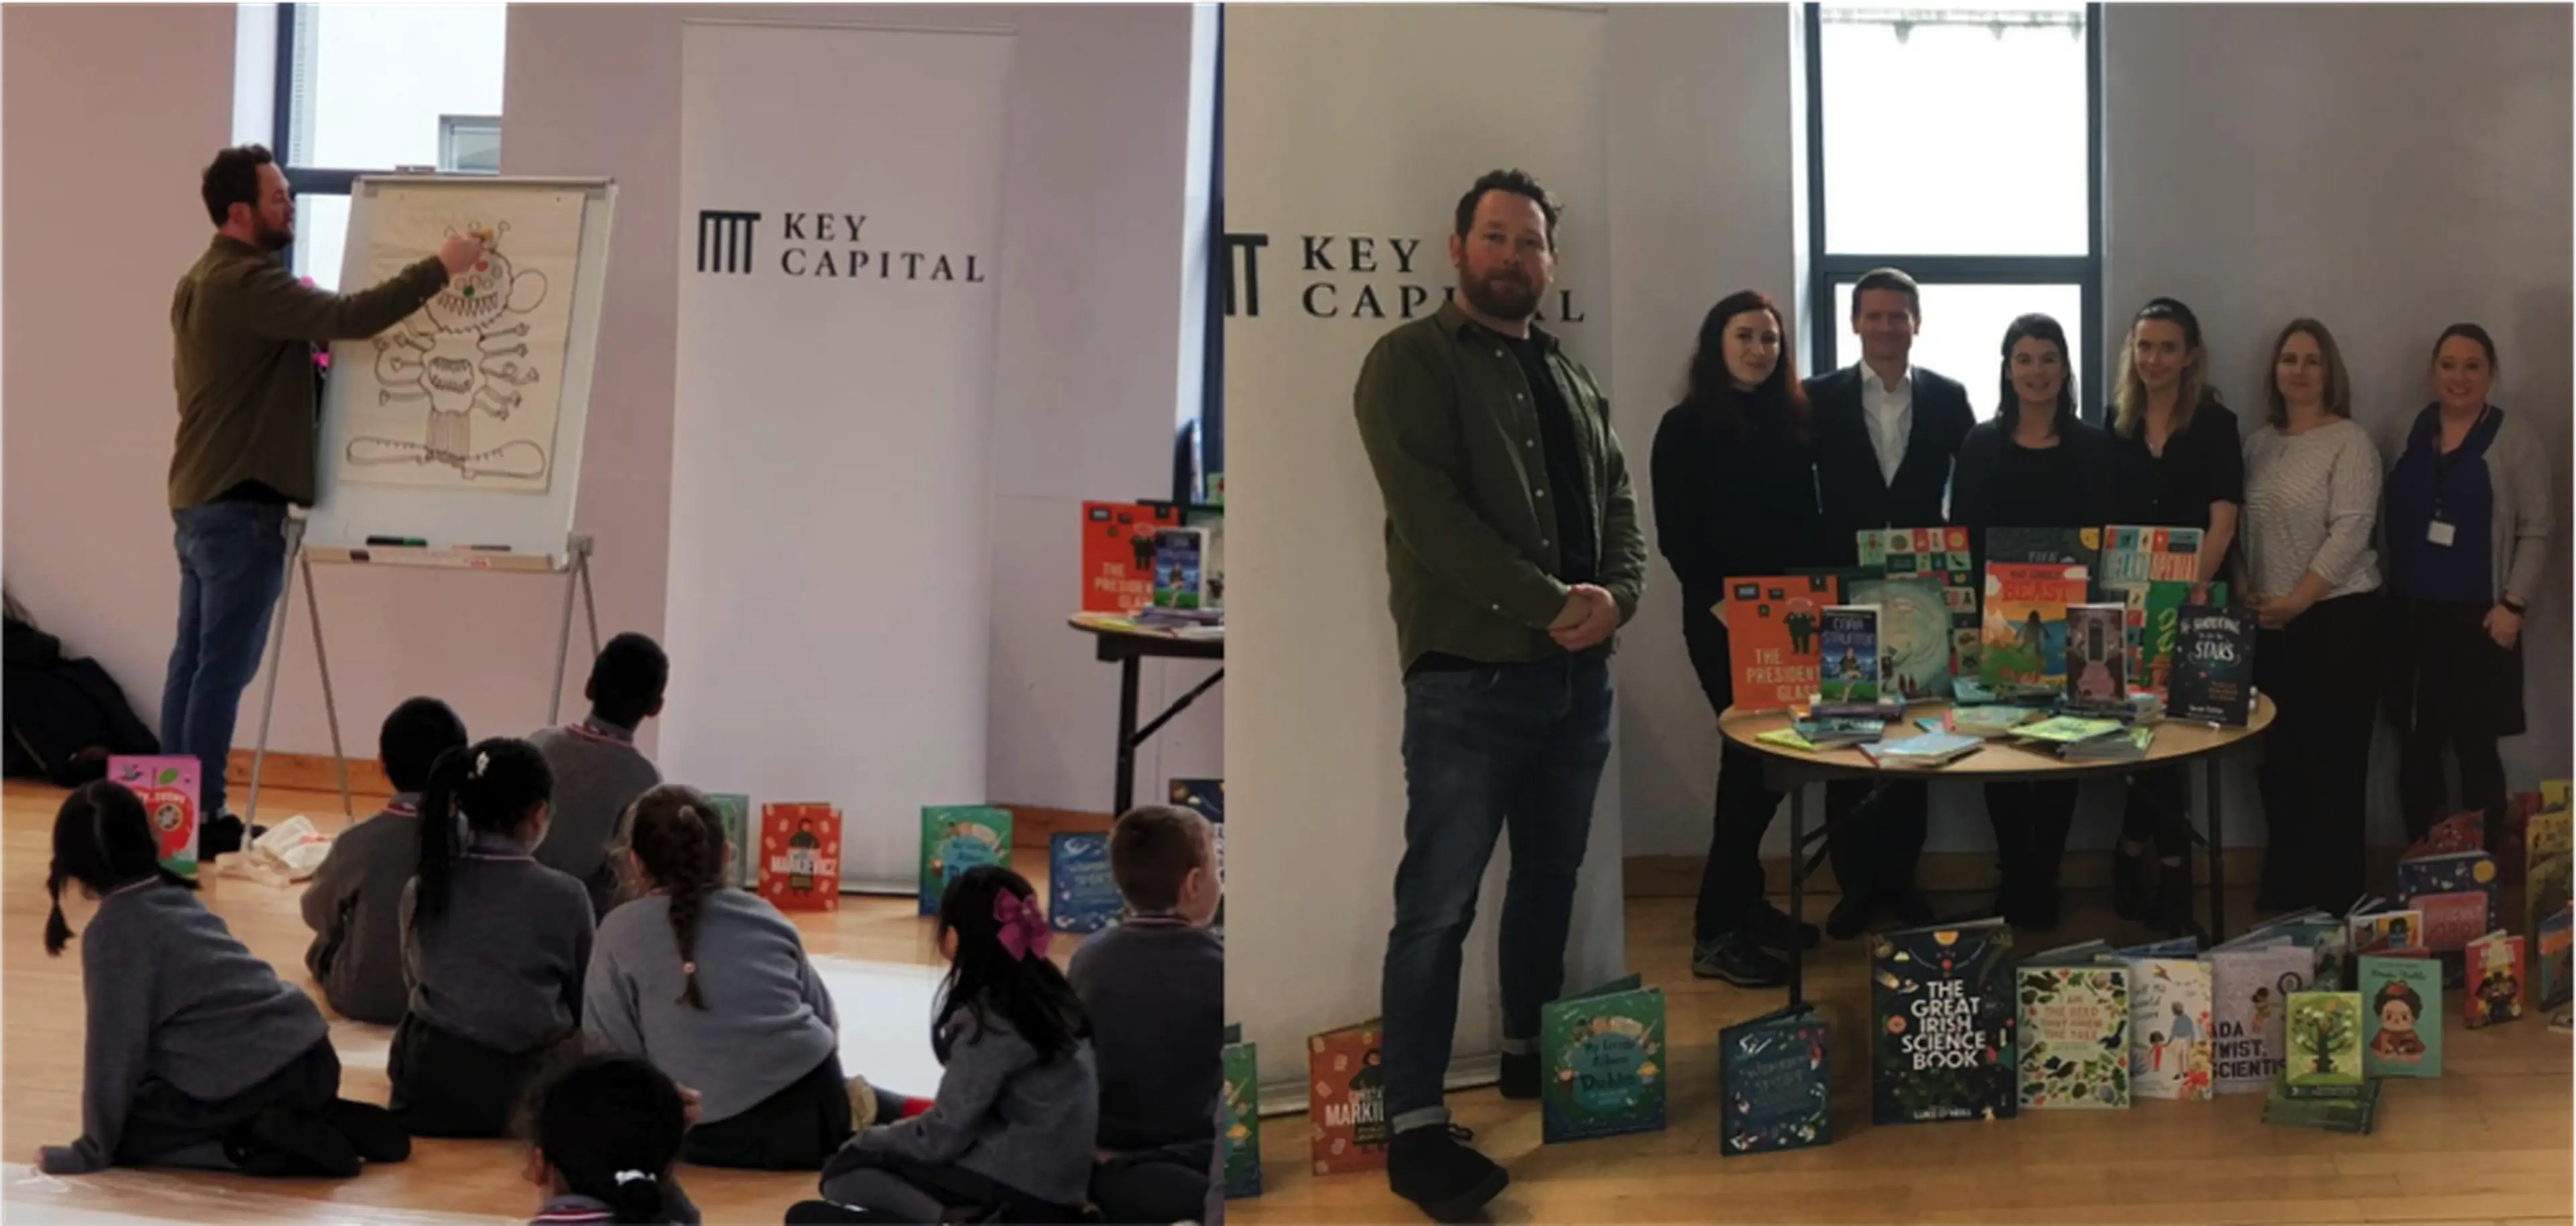 Key Capital are delighted to be working with Children's Books Ireland and St Enda’s School to gift 100 books to the school library. Our volunteers enjoyed a lovely morning yesterday meeting some of the children and doing some drawing with them.